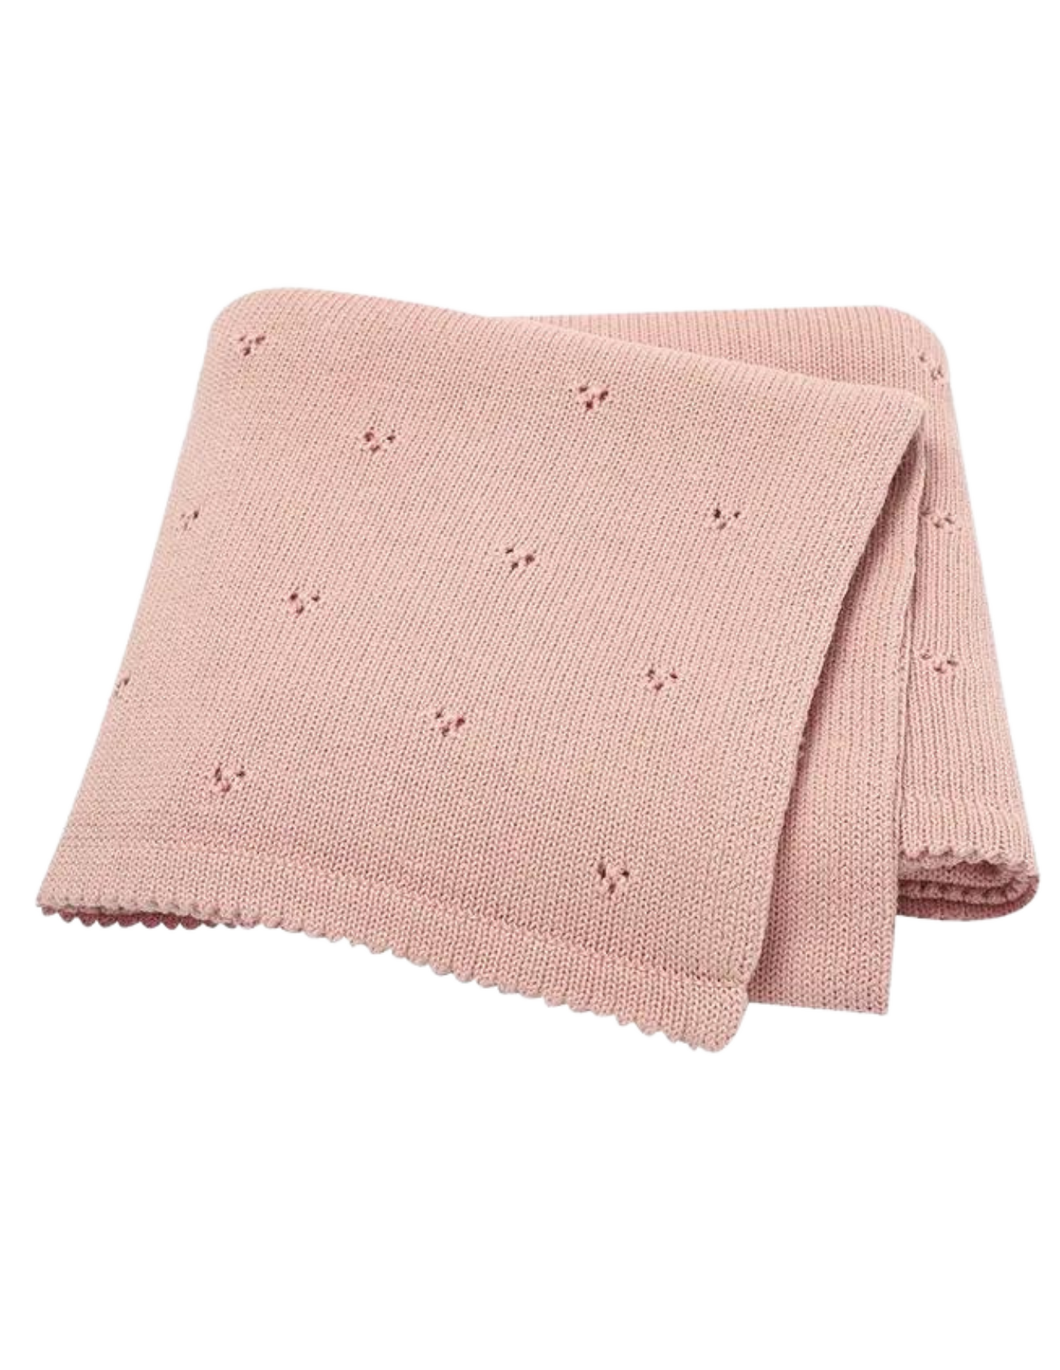 Knitted Eyelet Baby Blanket in Blush - CovetedThings